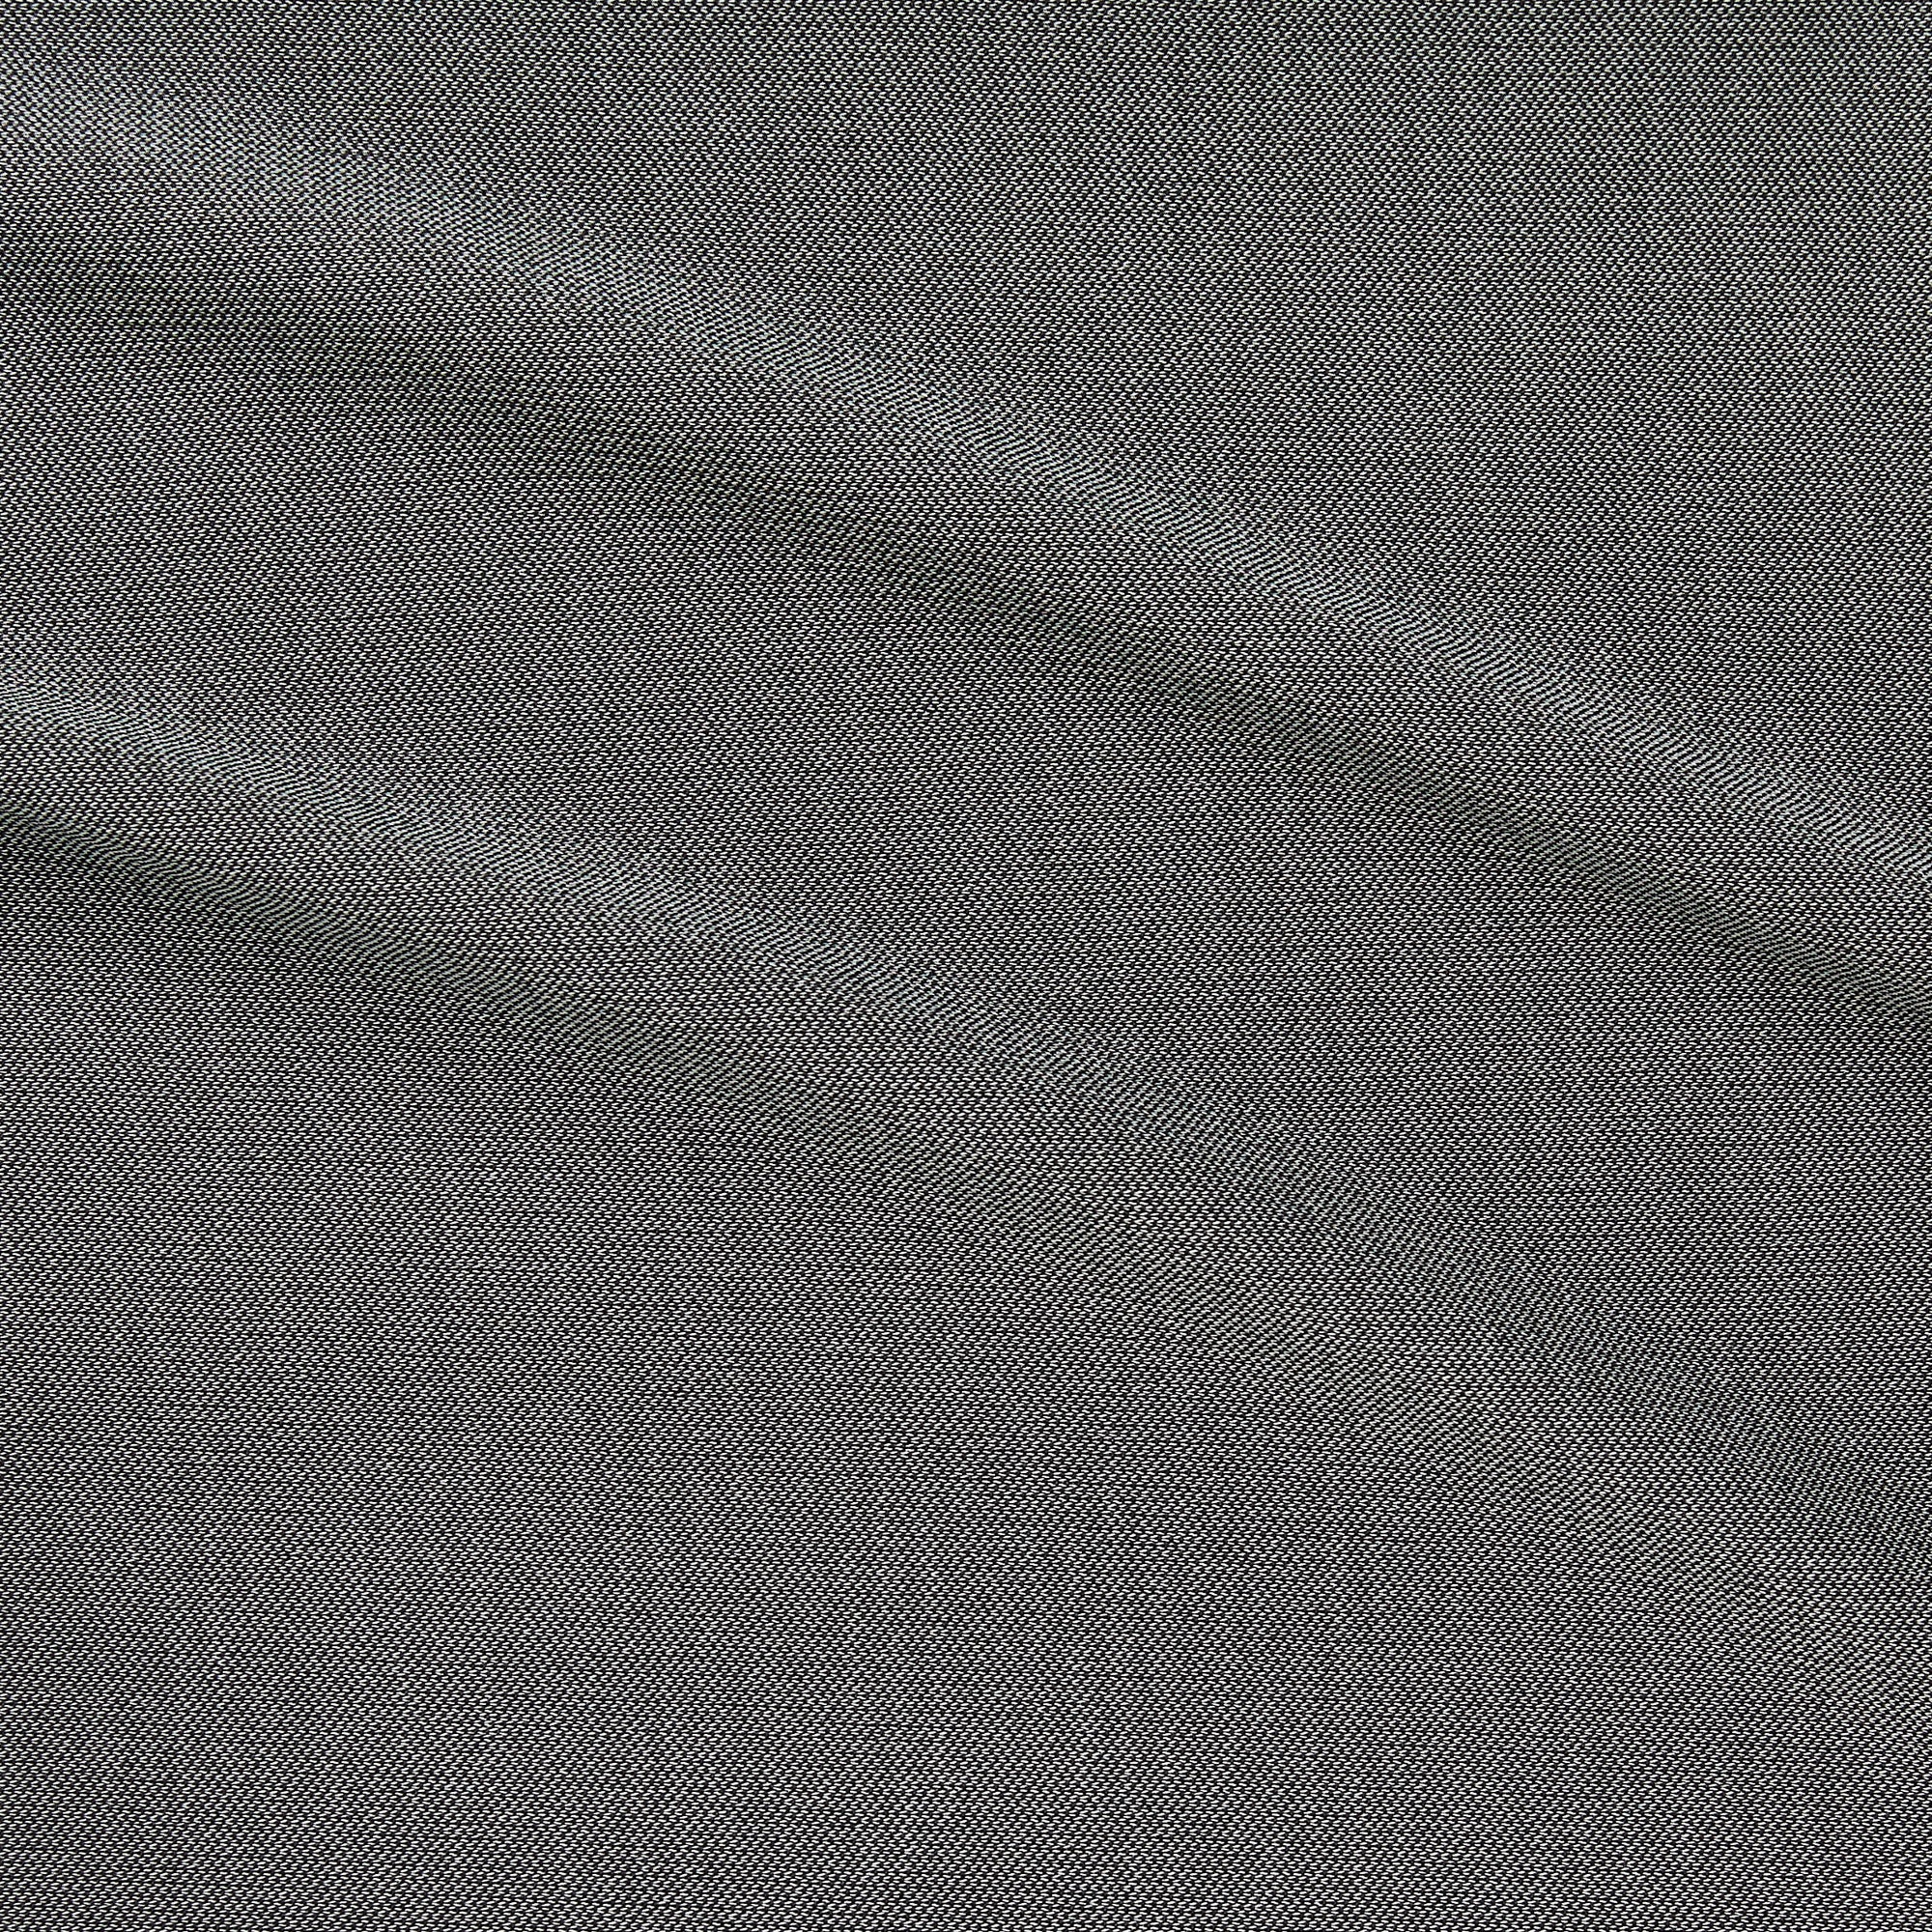 Presenting illusion knit a grey color version of a stretch polyester and nylon blend with good drape